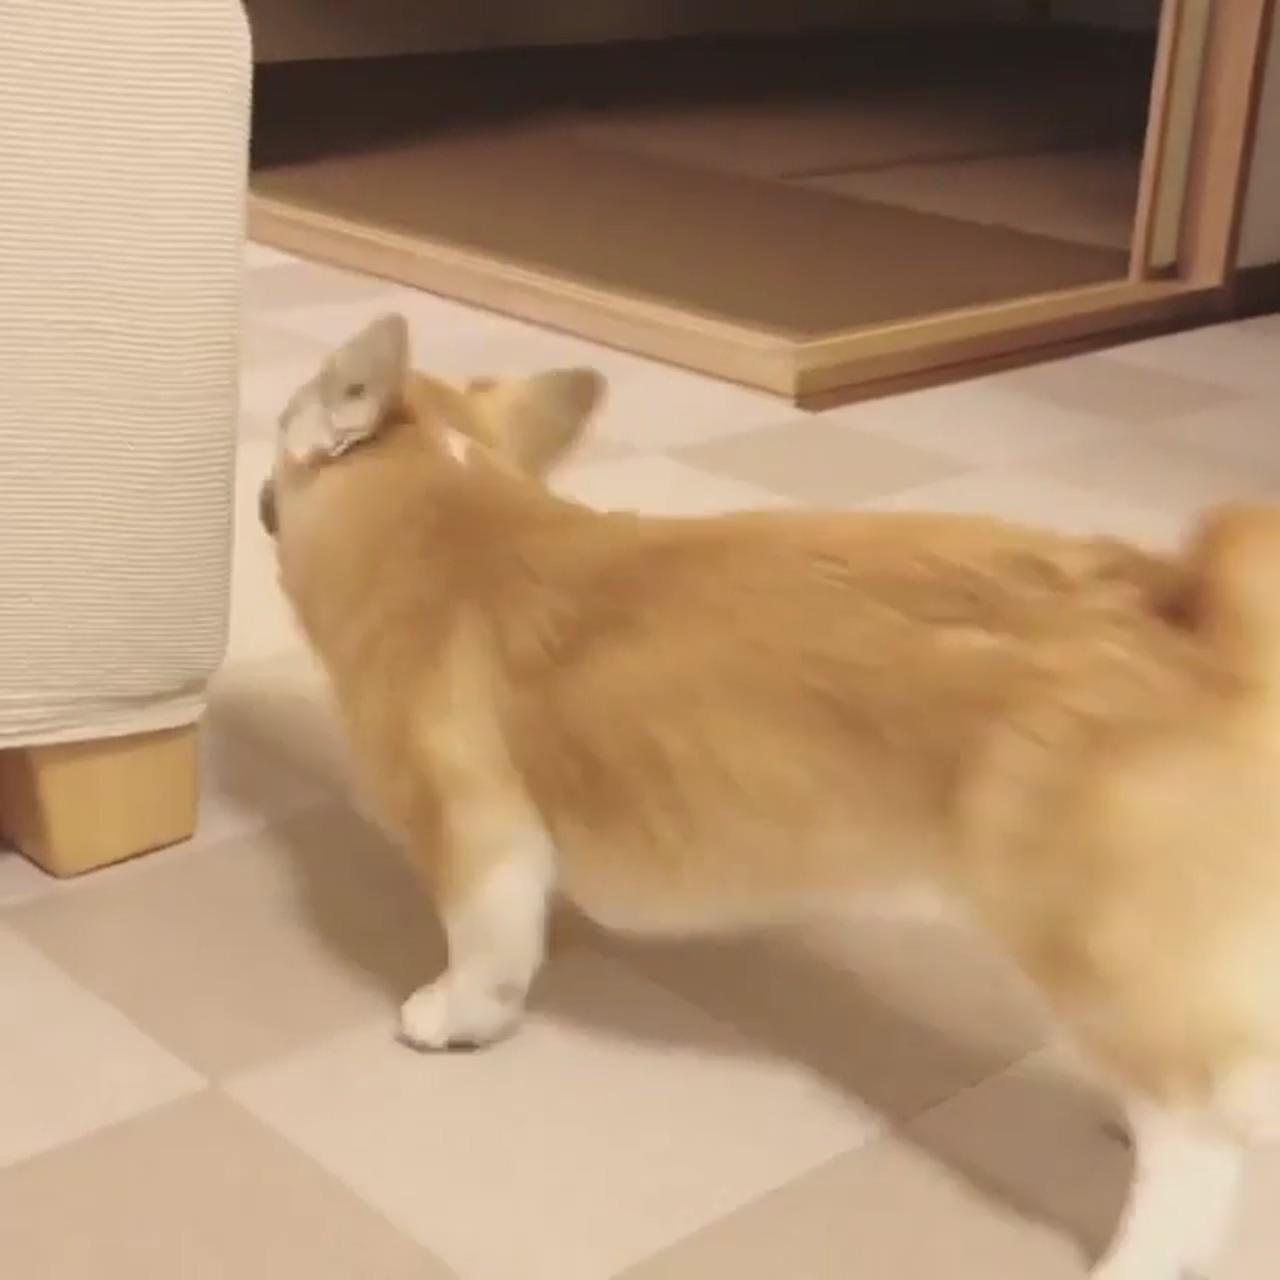 Corgi's reaction was priceless after all that hard work; i am okay, still can drink more